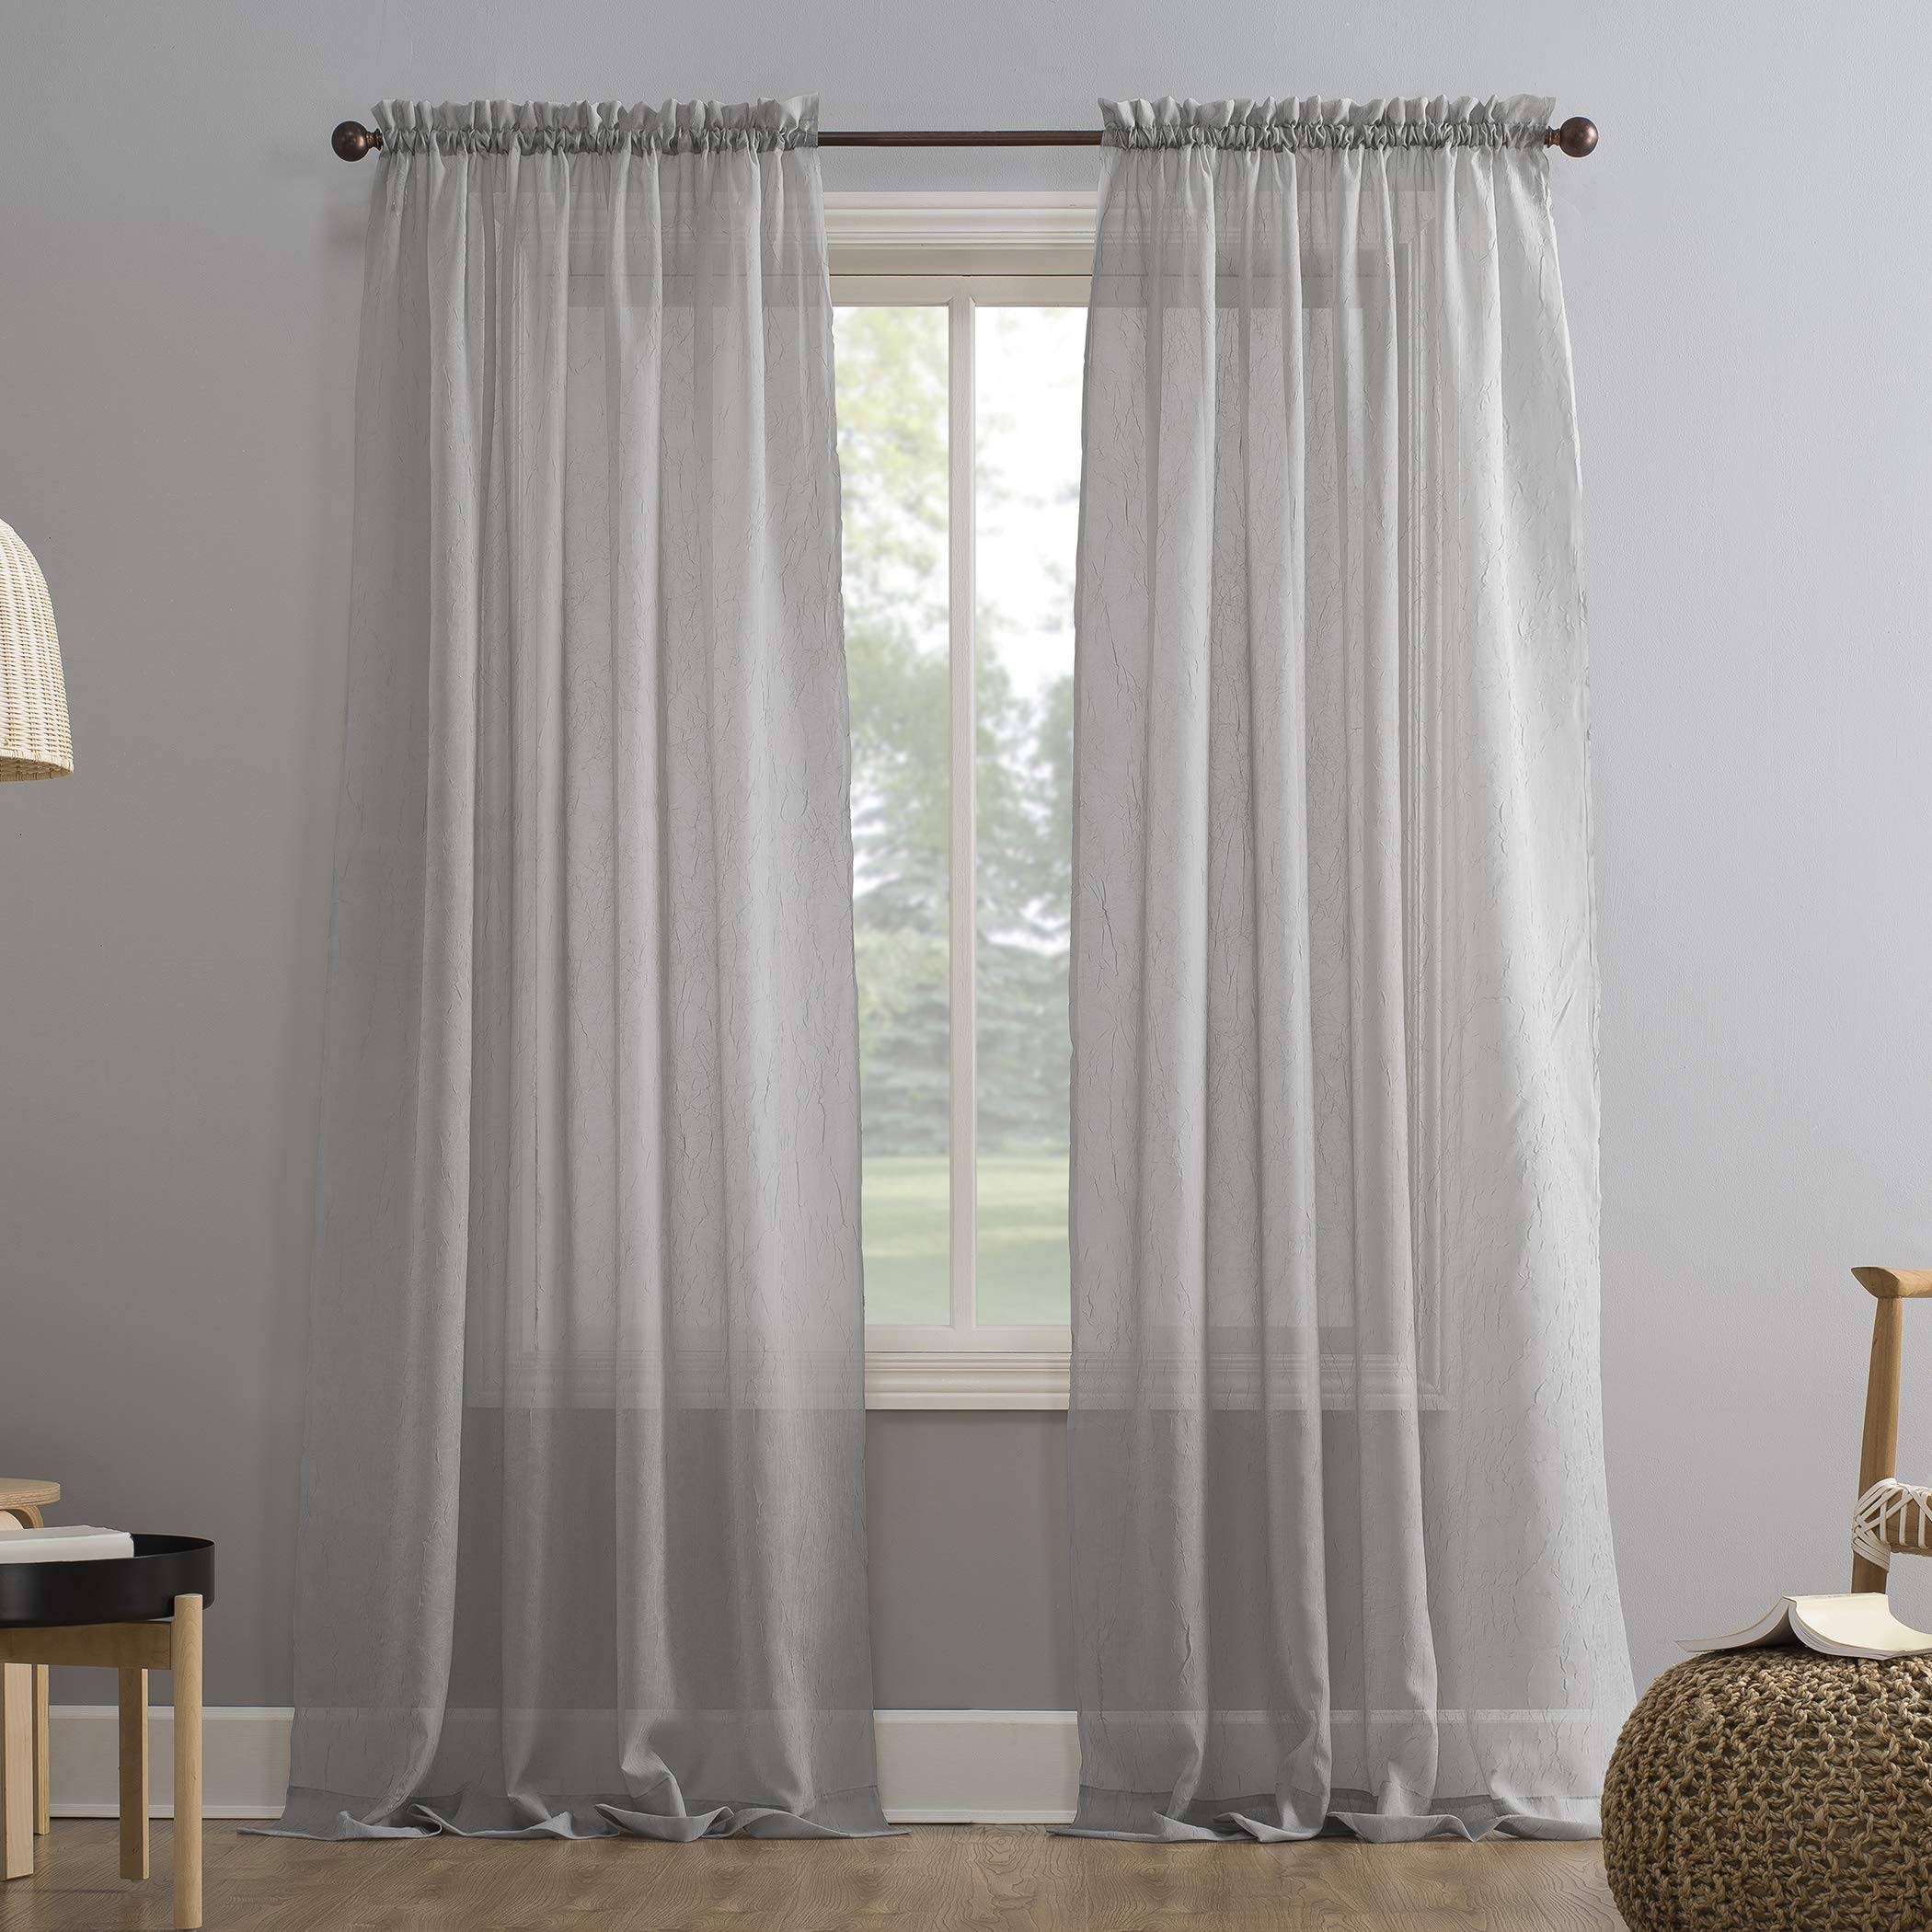 NO. 918 Crushed Sheer Voile 51" x 84" Curtain Panel - Silver